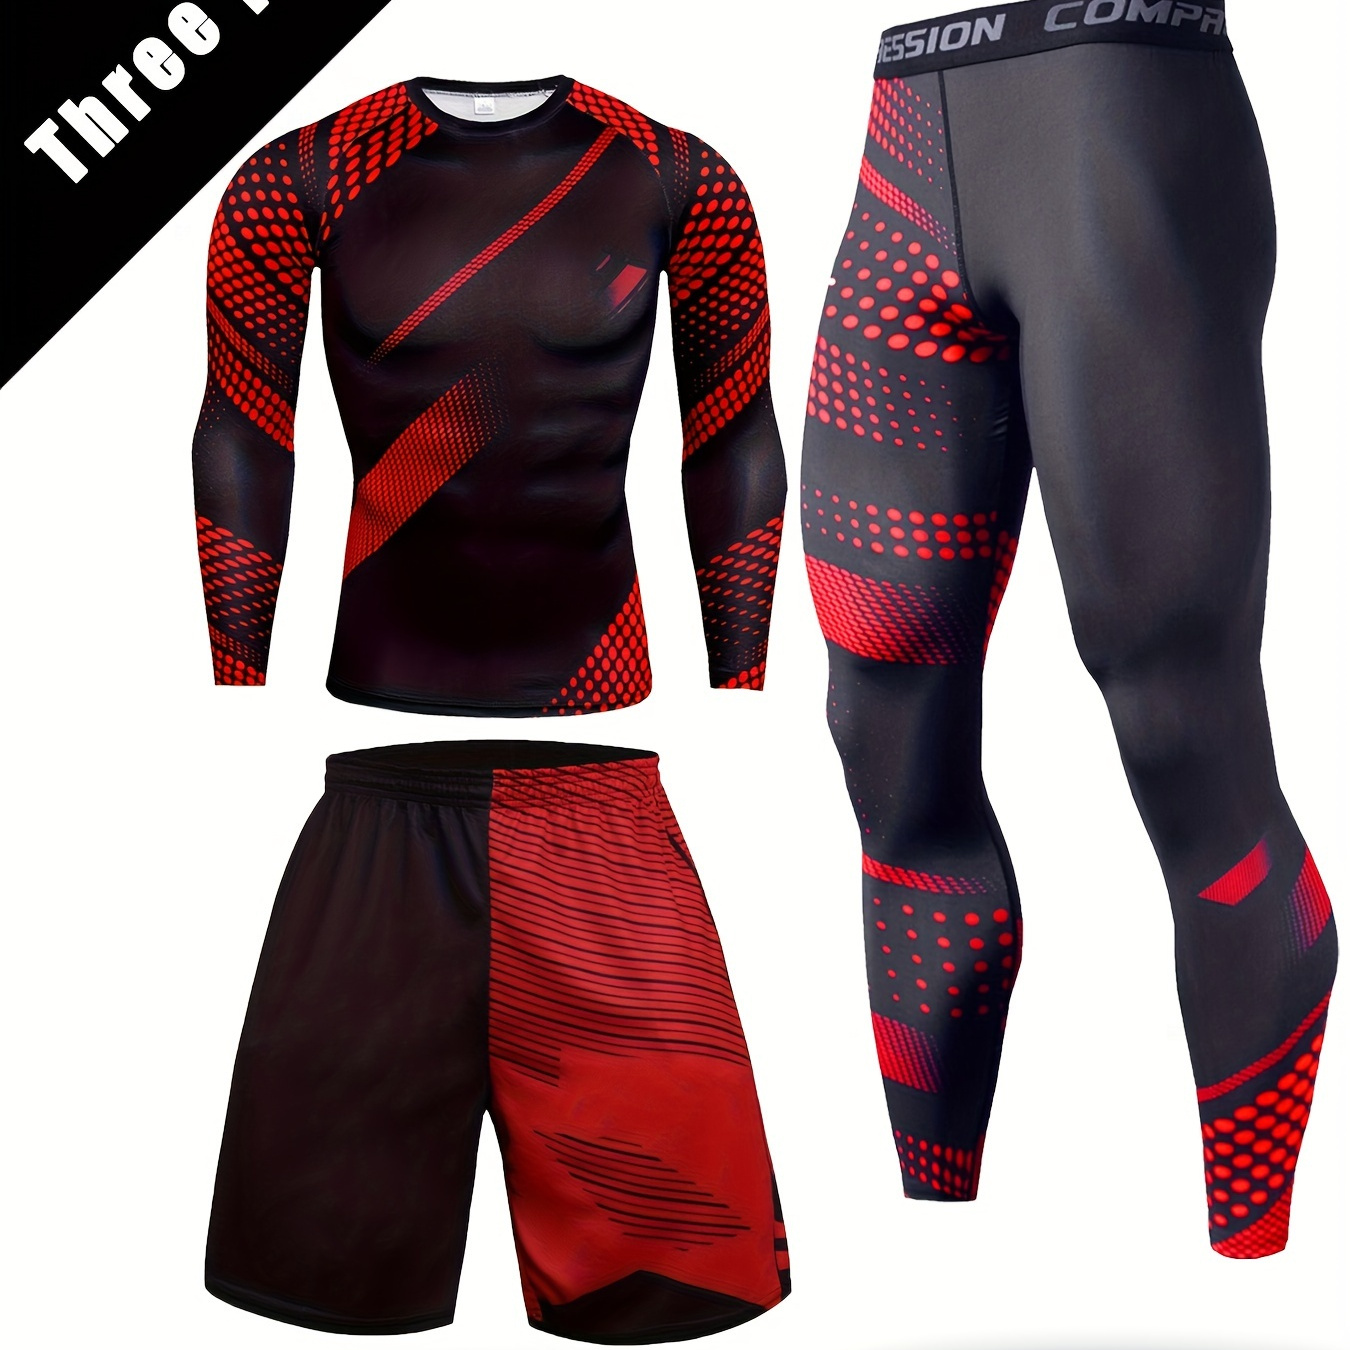 

3-piece Men's Color Block Pattern Quick Dry Sports Suits, Long Sleeve Compression T-shirts + Breathable Shorts + High Stretch Leggings